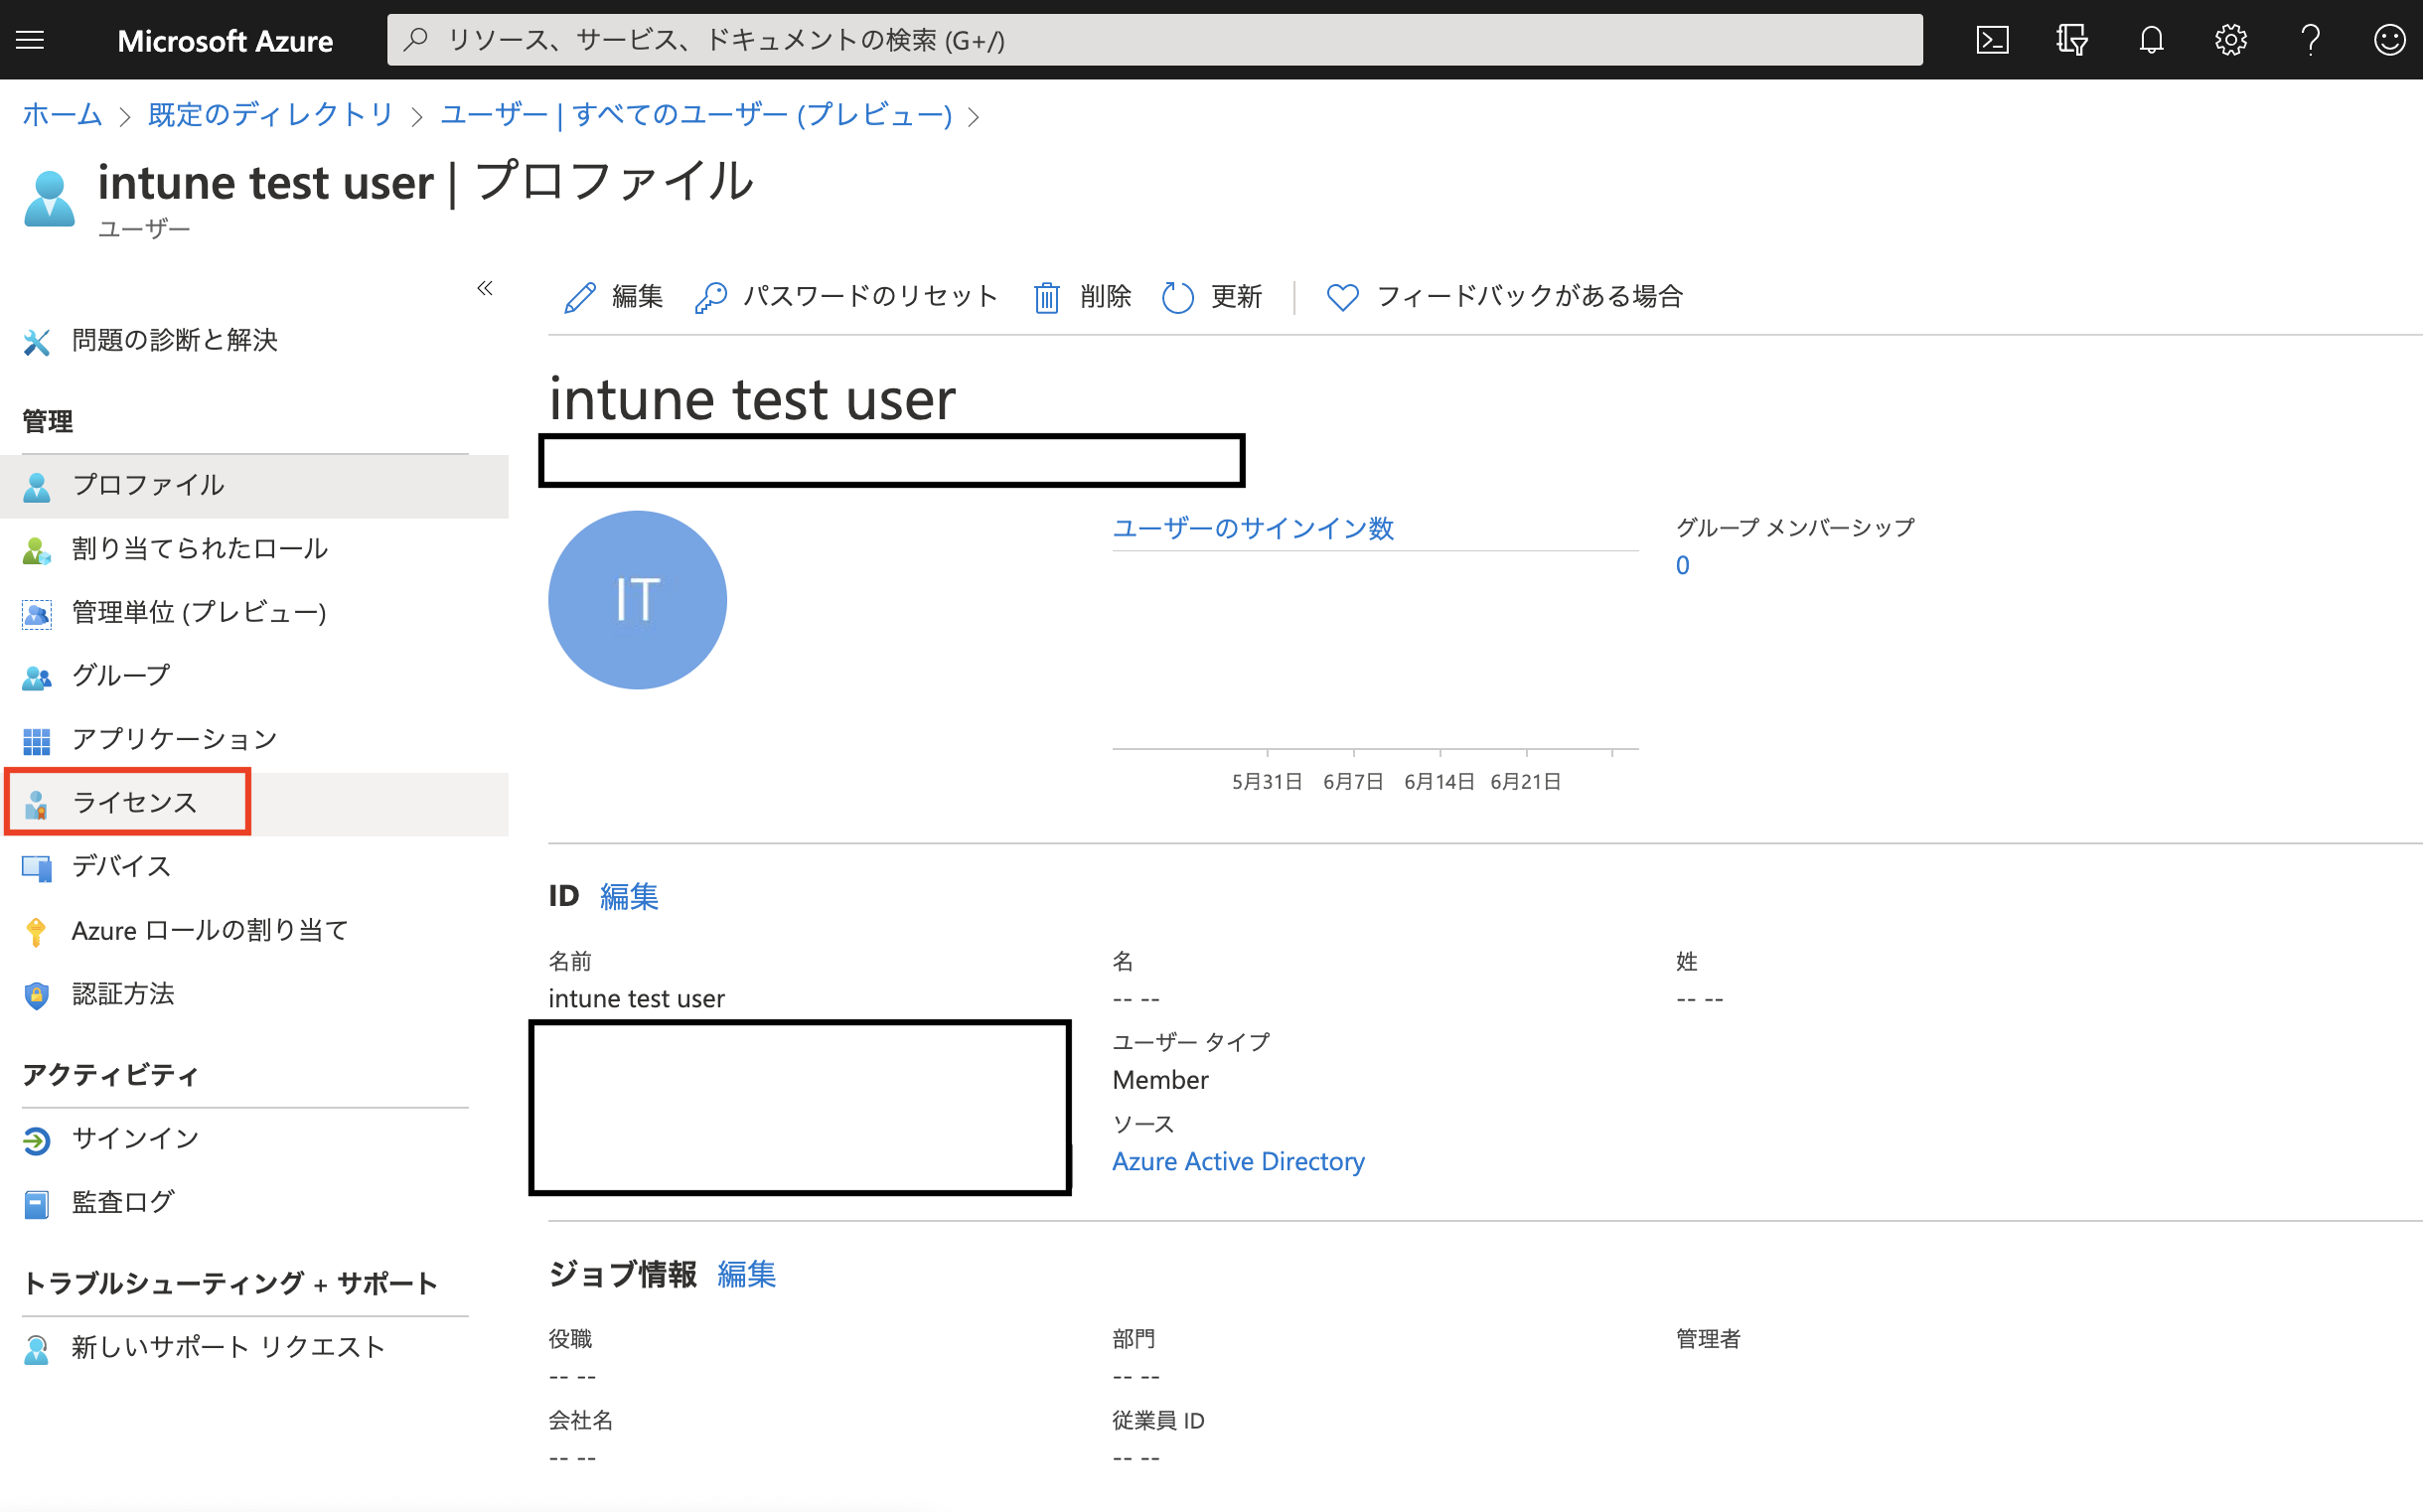 intune_test_user_1.png